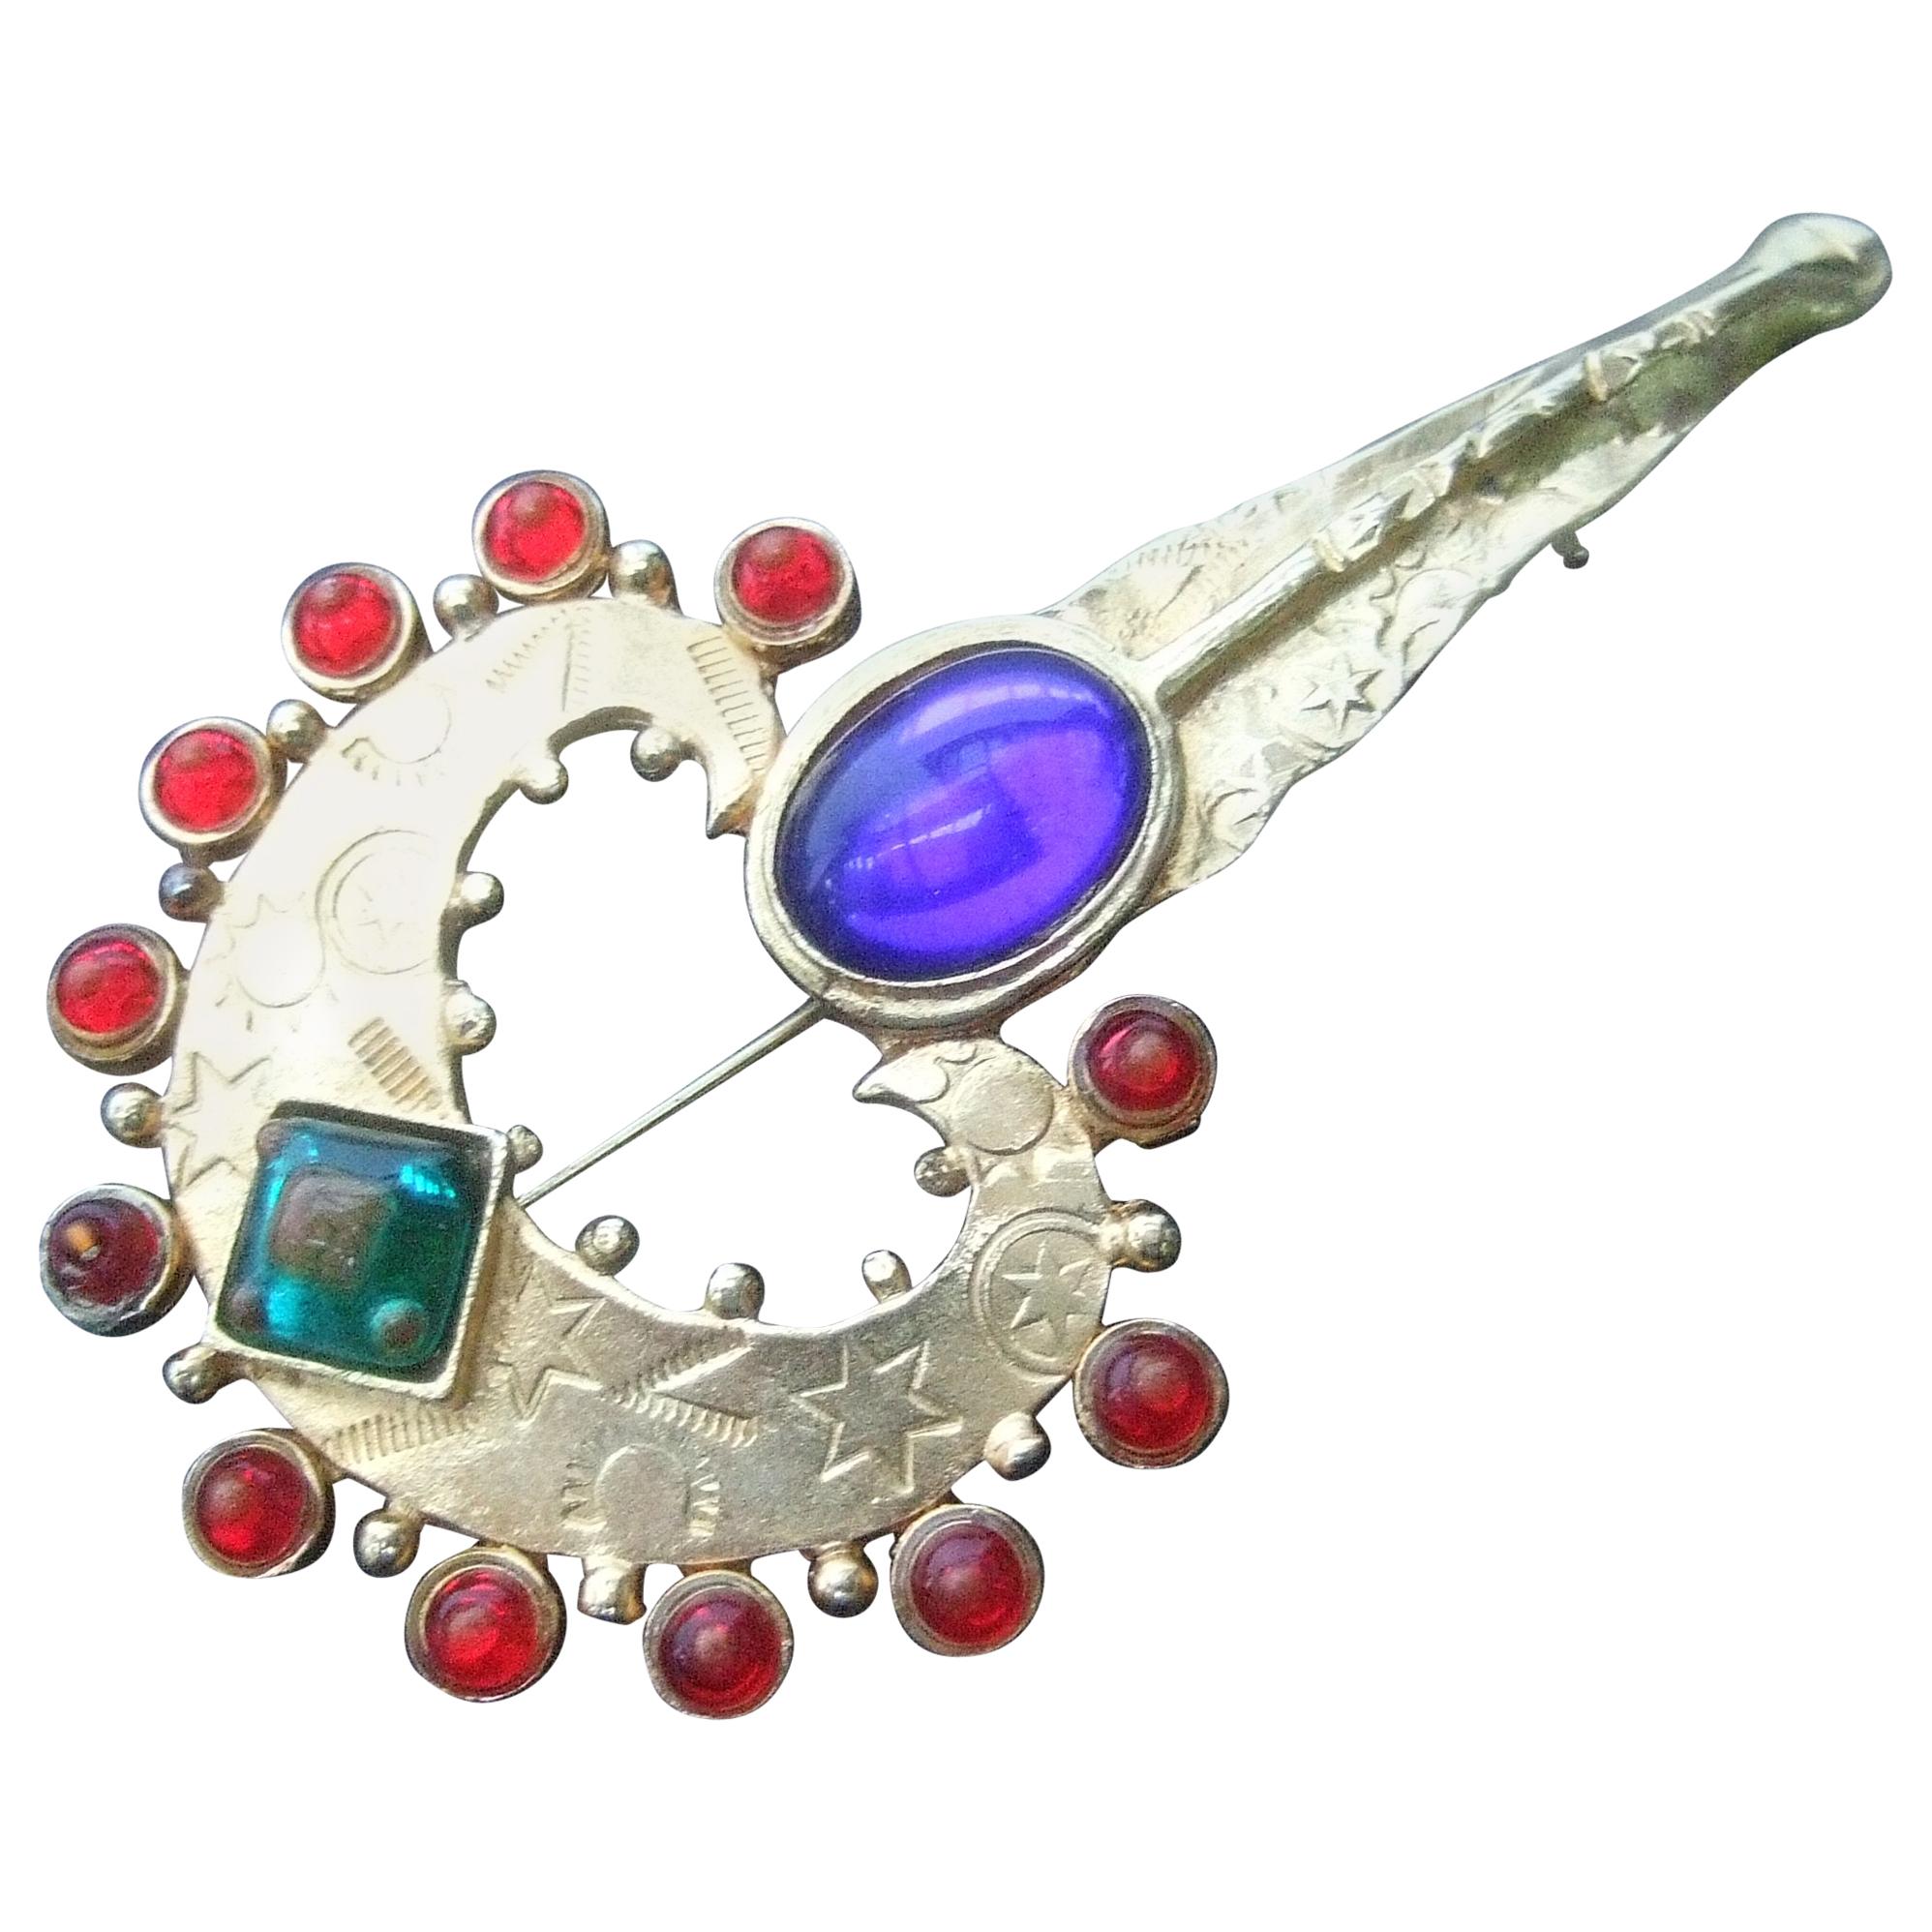 Glass Jeweled Heart & Key Brooch Designed by Robert Rose c 1980s For Sale